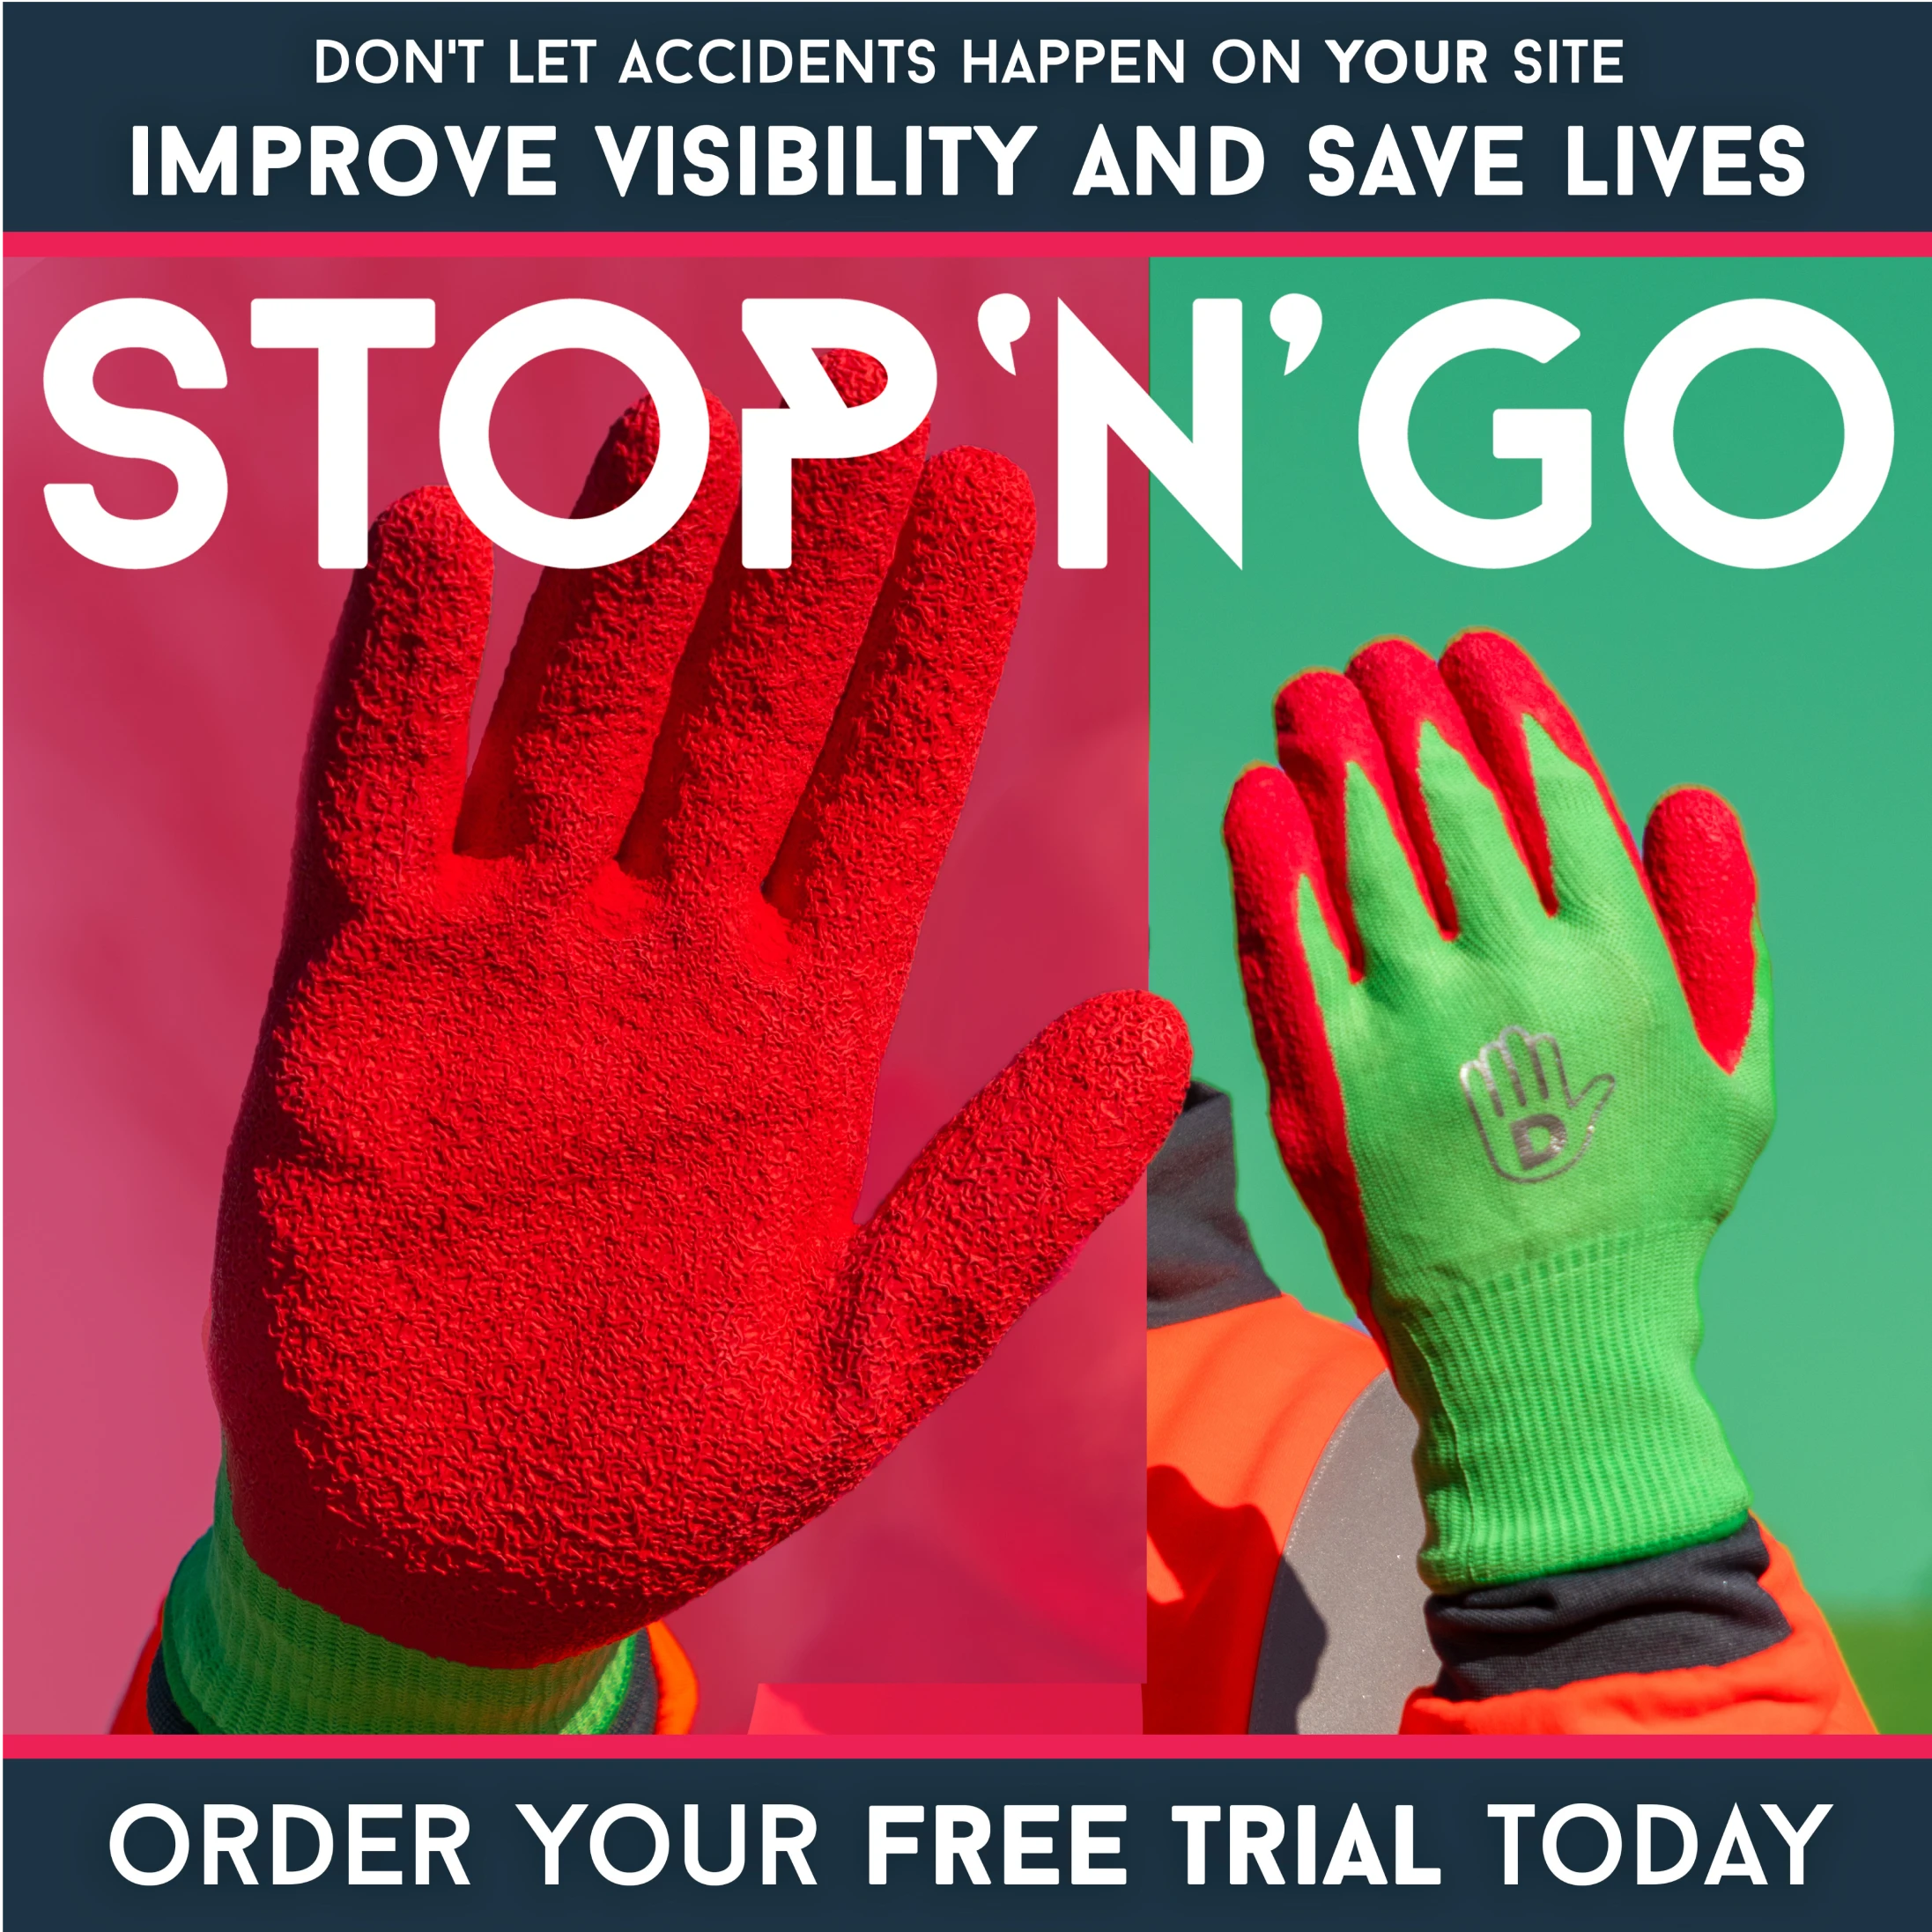 A pair of gloves with red and green gloves